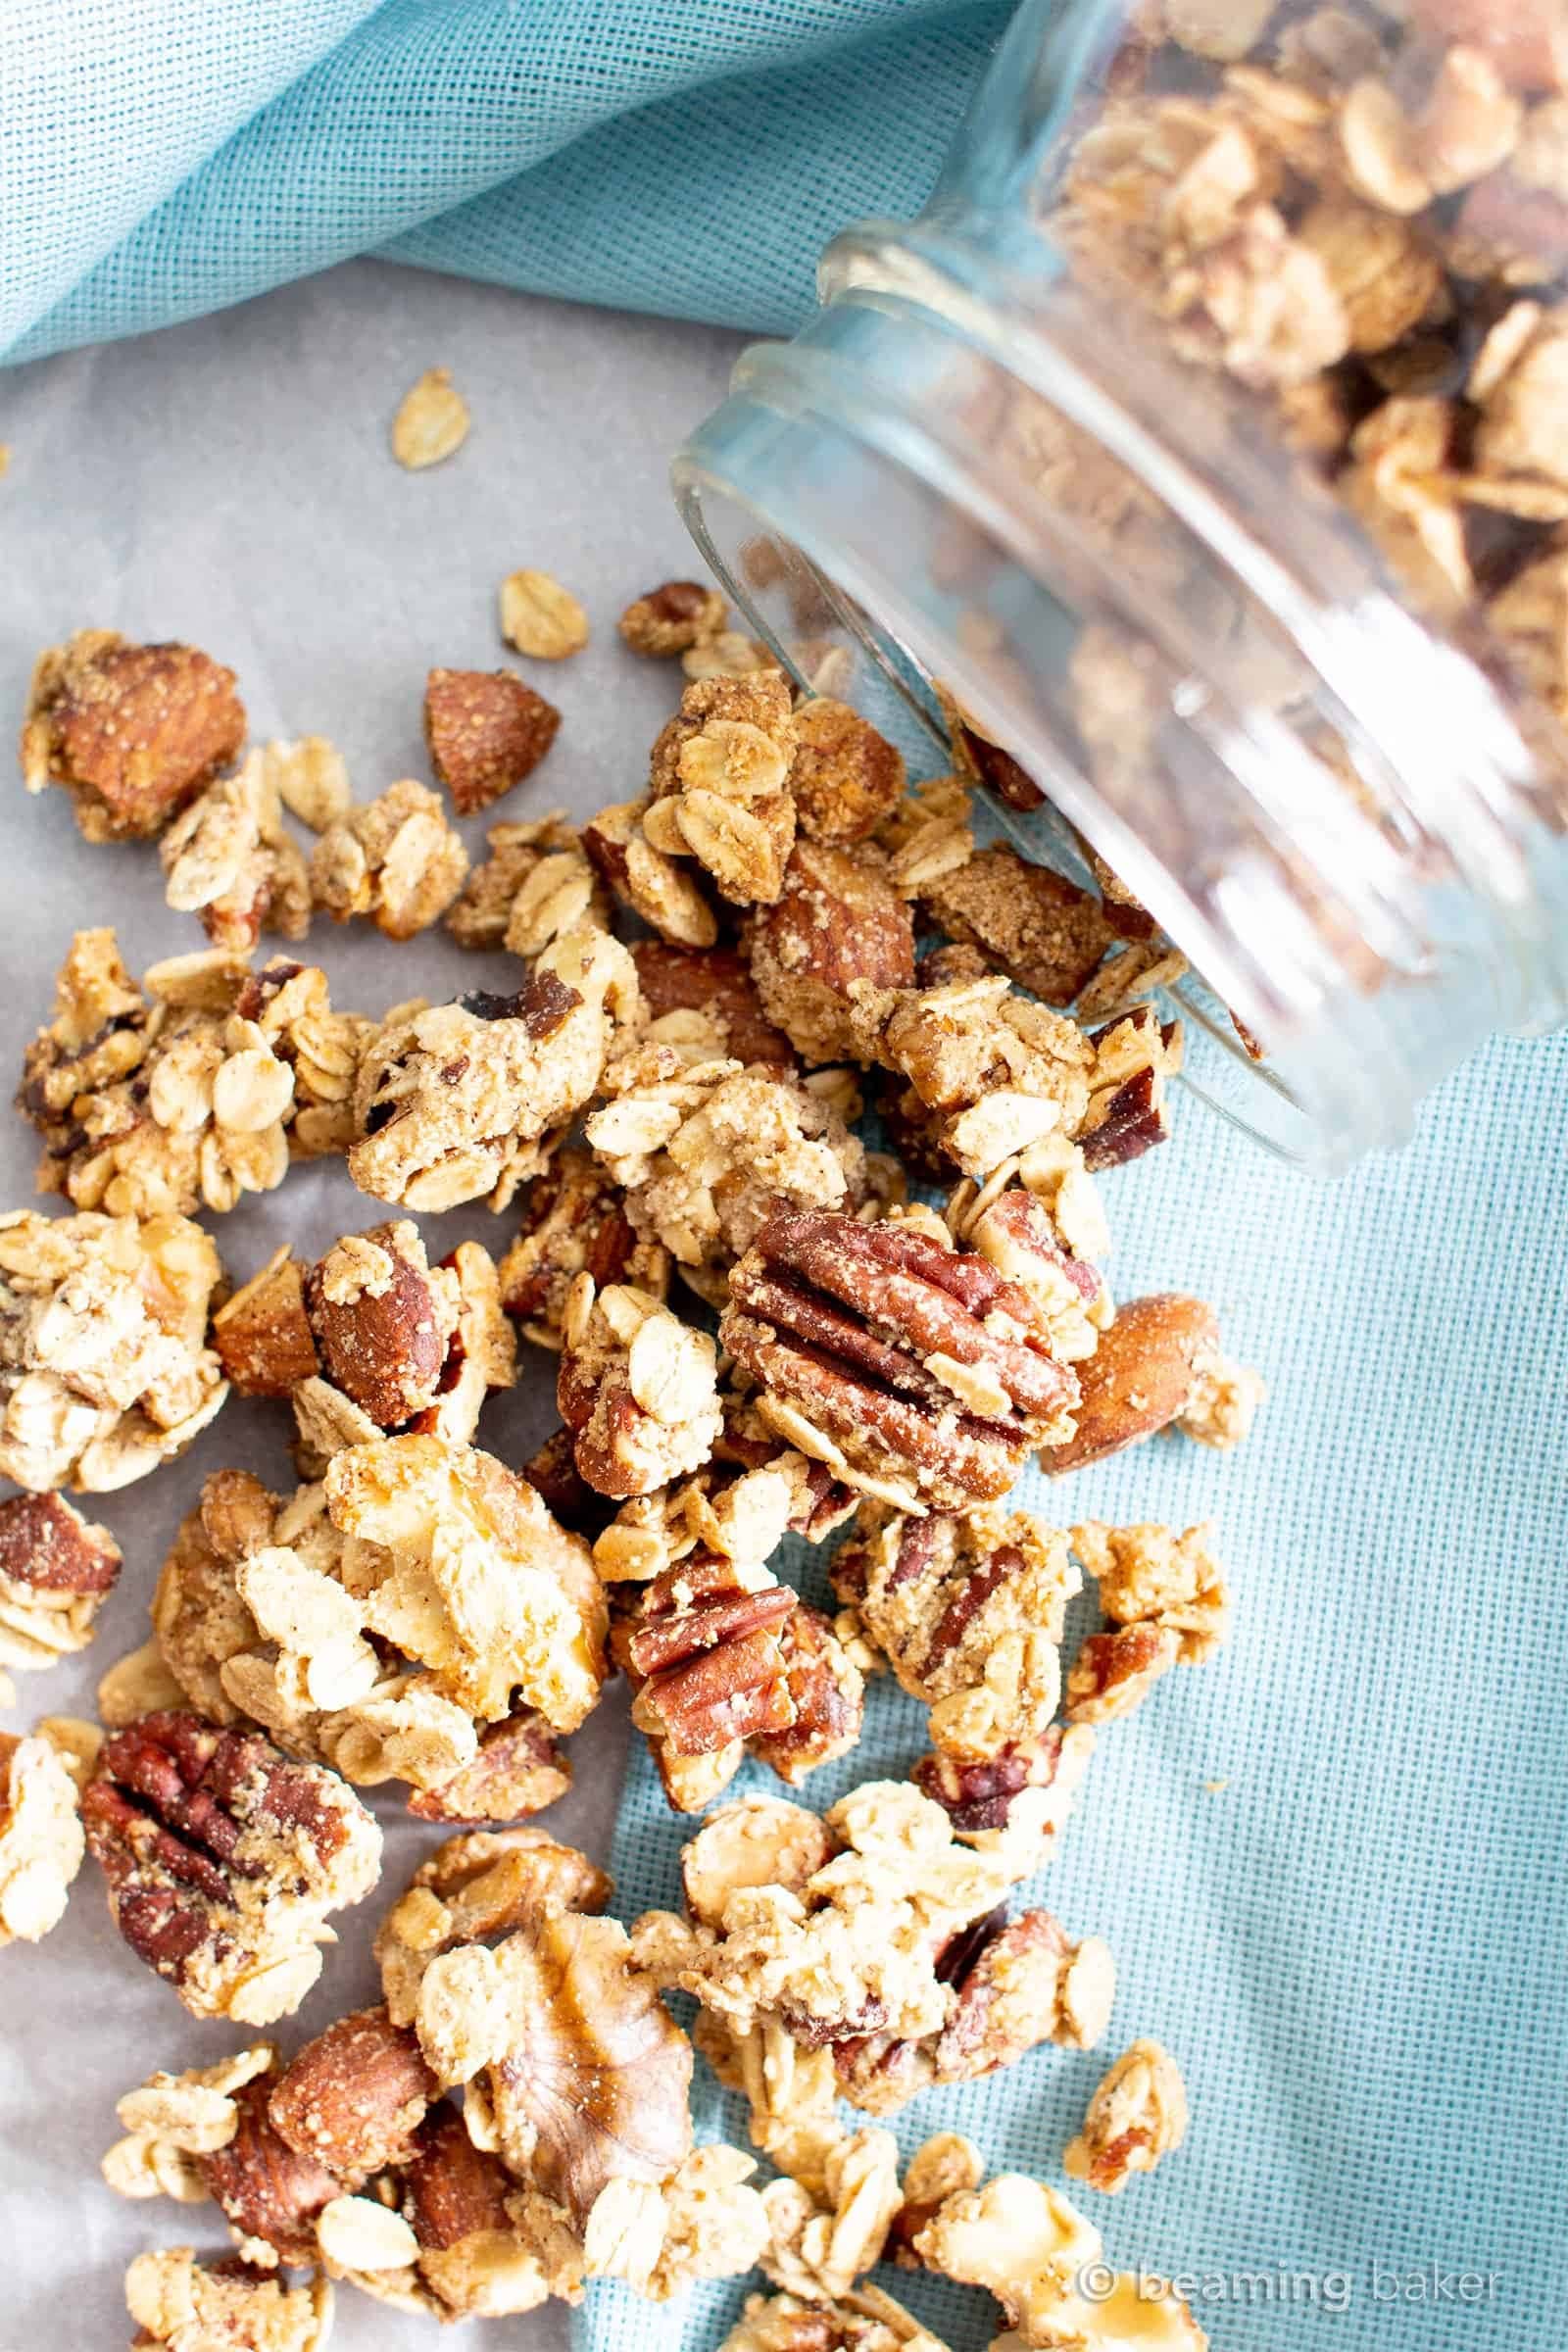 Clusters of crunchy granola poured from a glass jar.